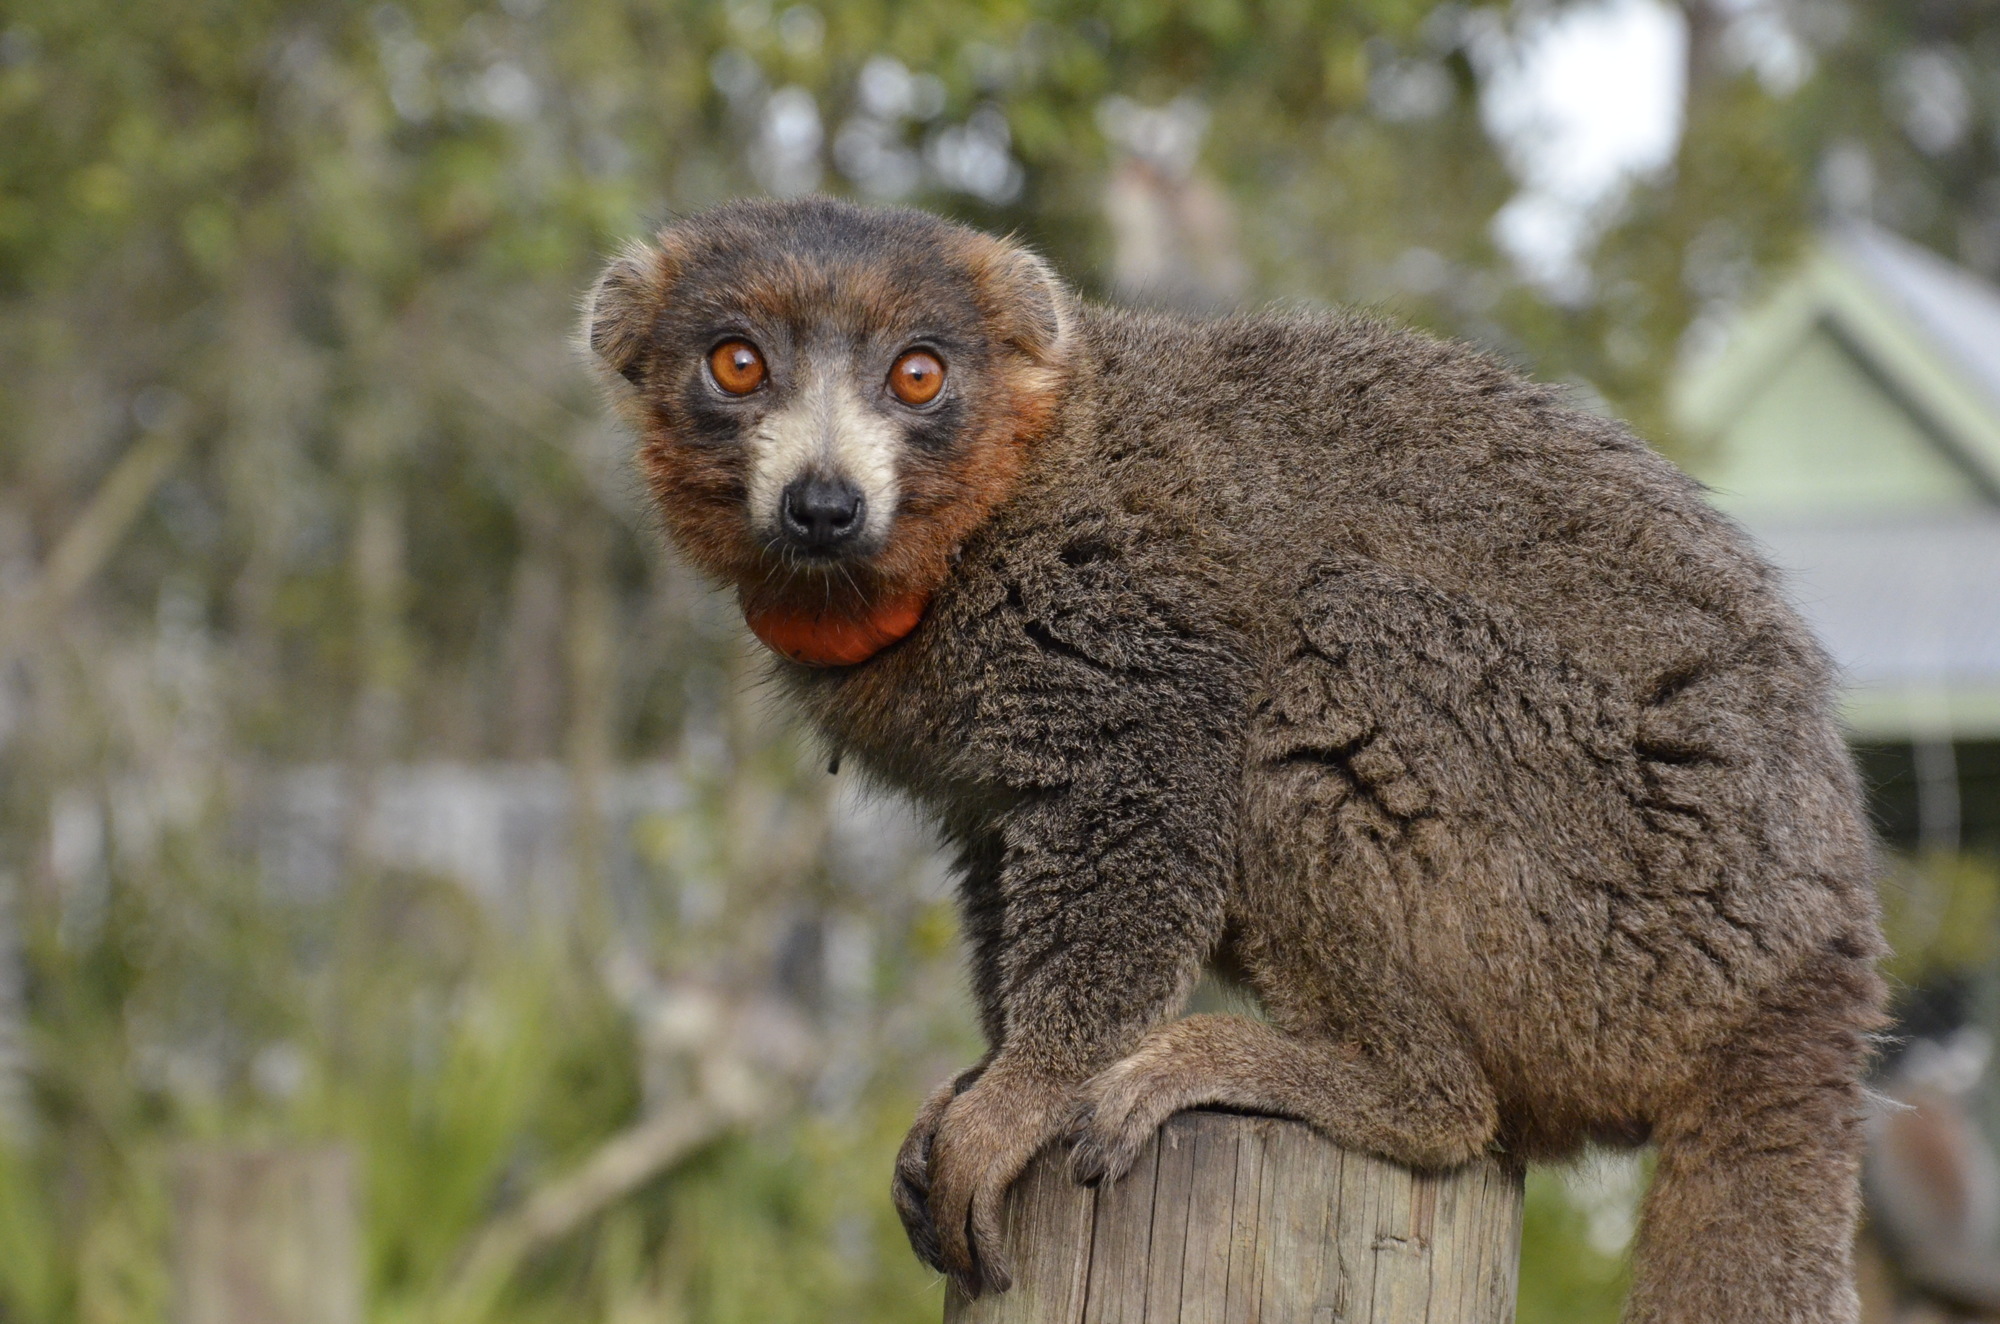 The mongoose lemur lets out a loud bark many times its small size.